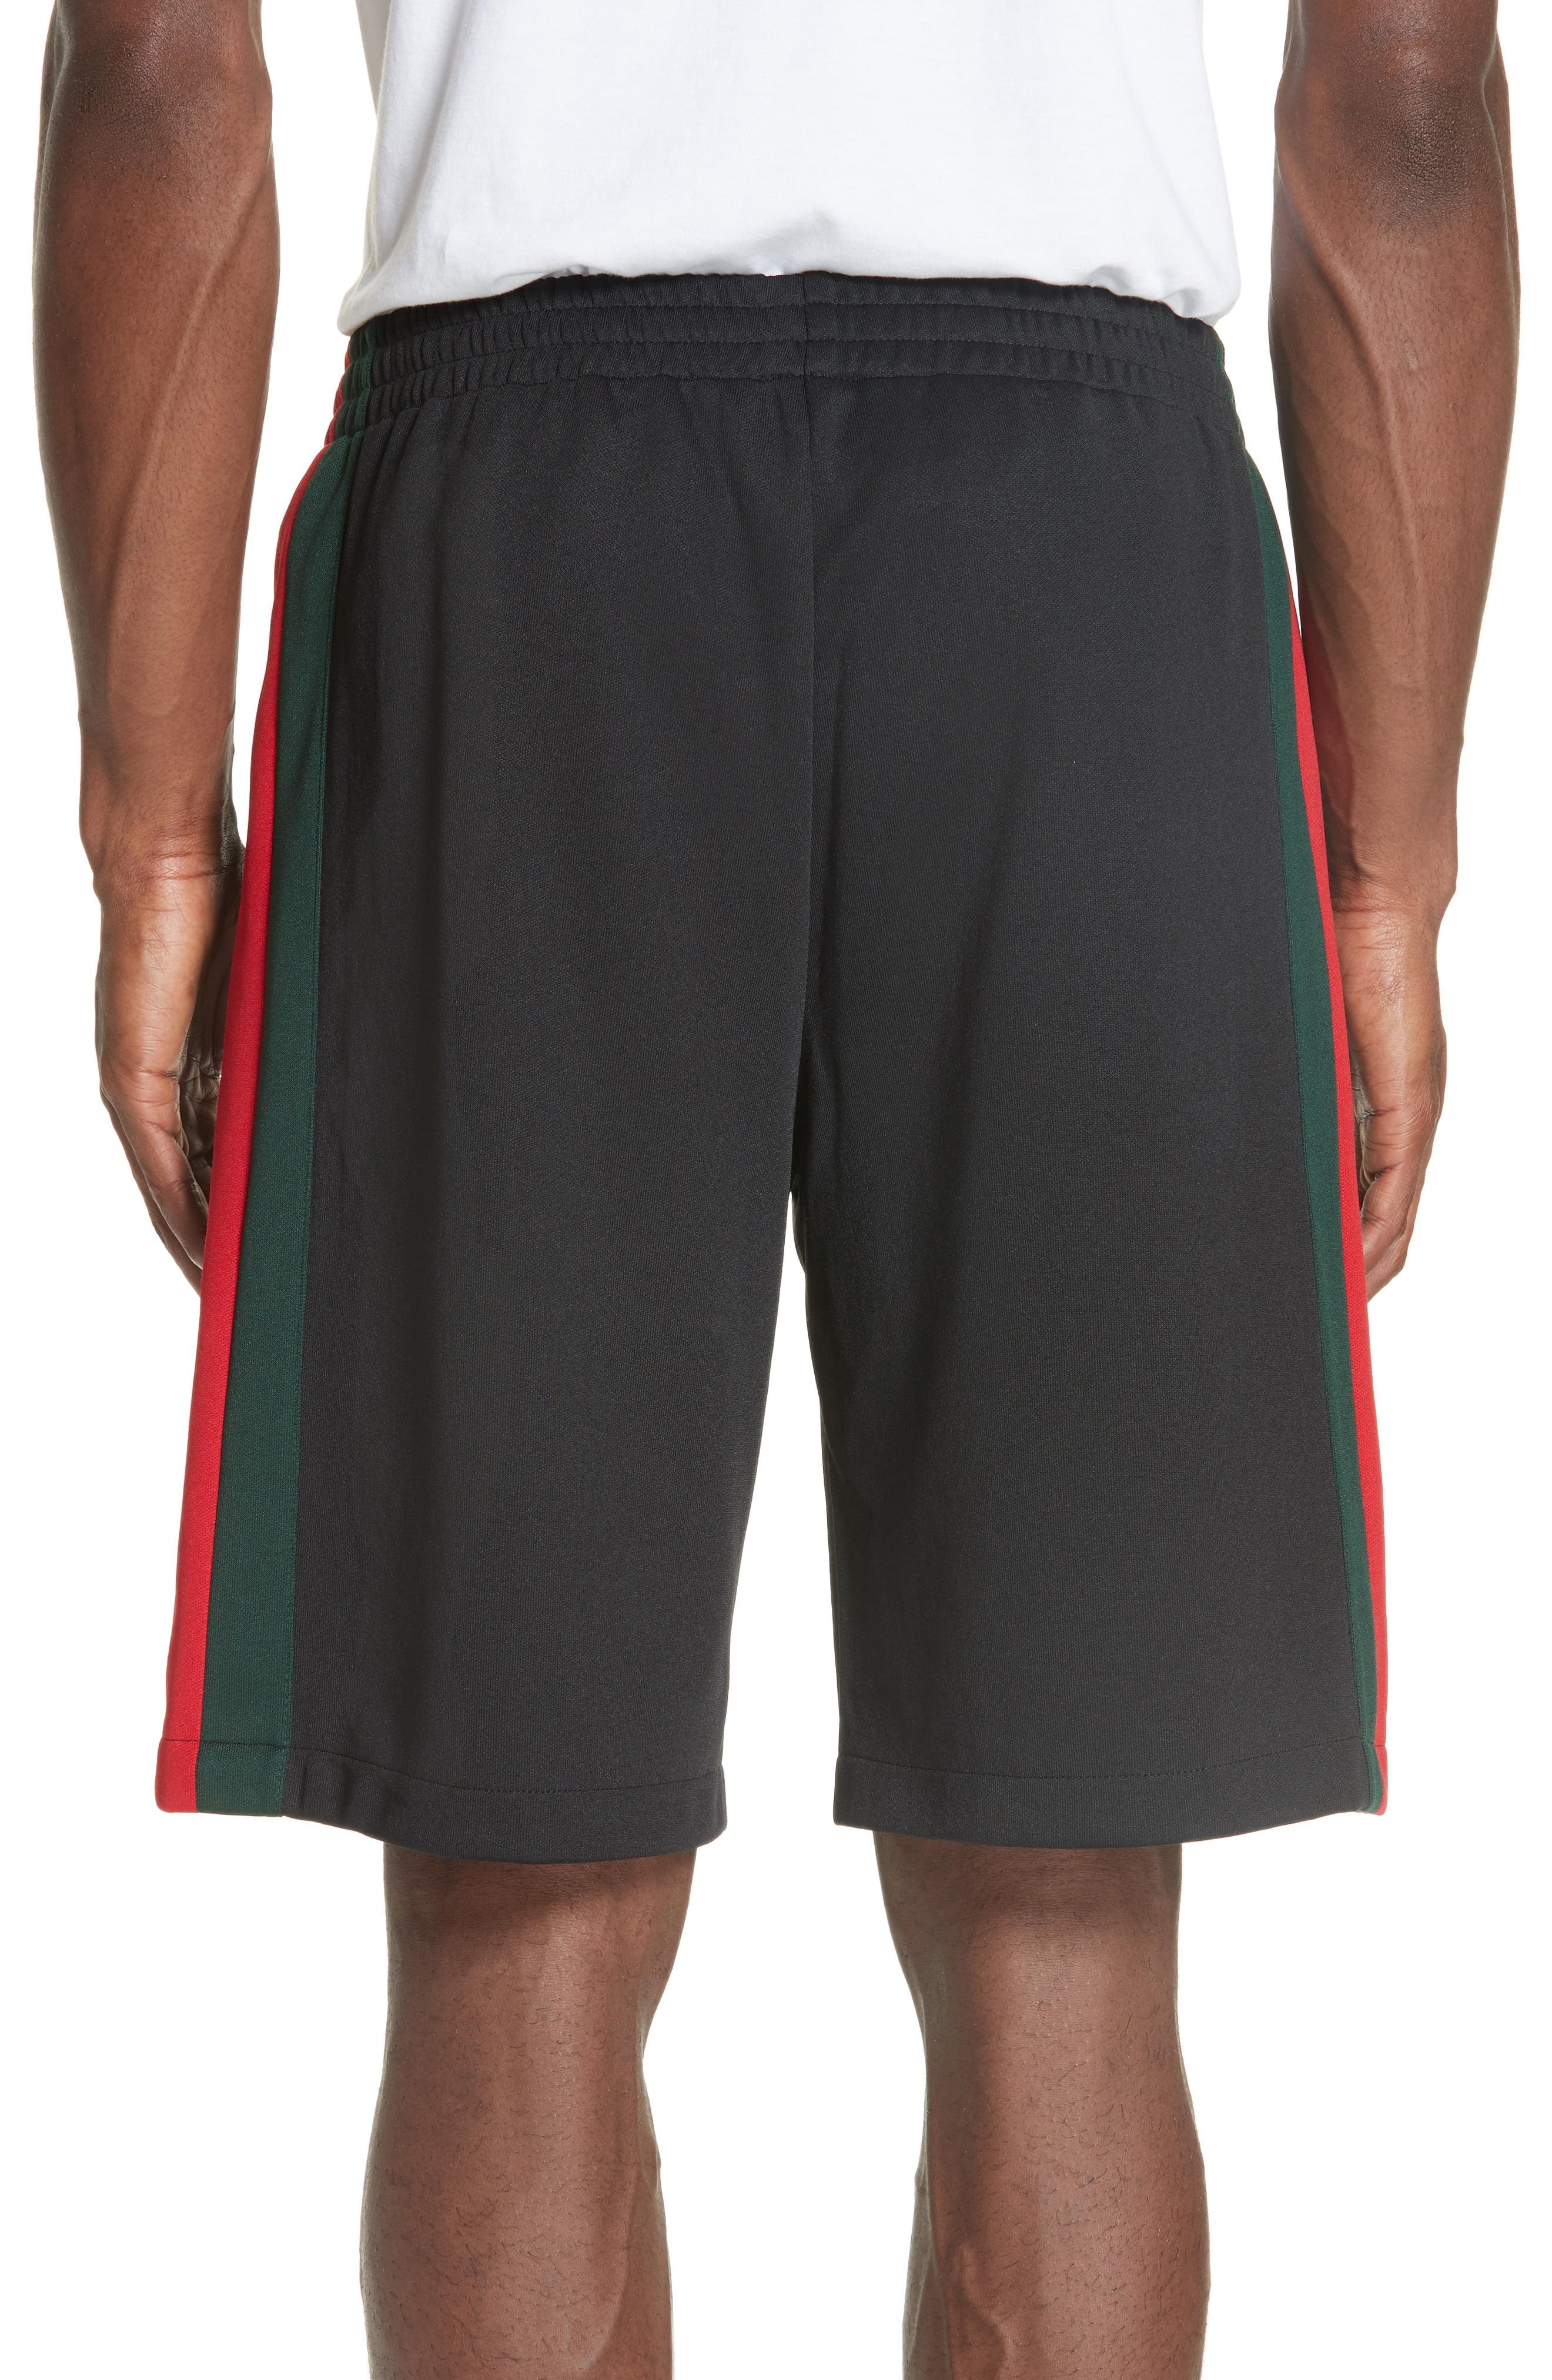 Gucci Synthetic Stripe Knit Track Shorts in Black for Men - Lyst